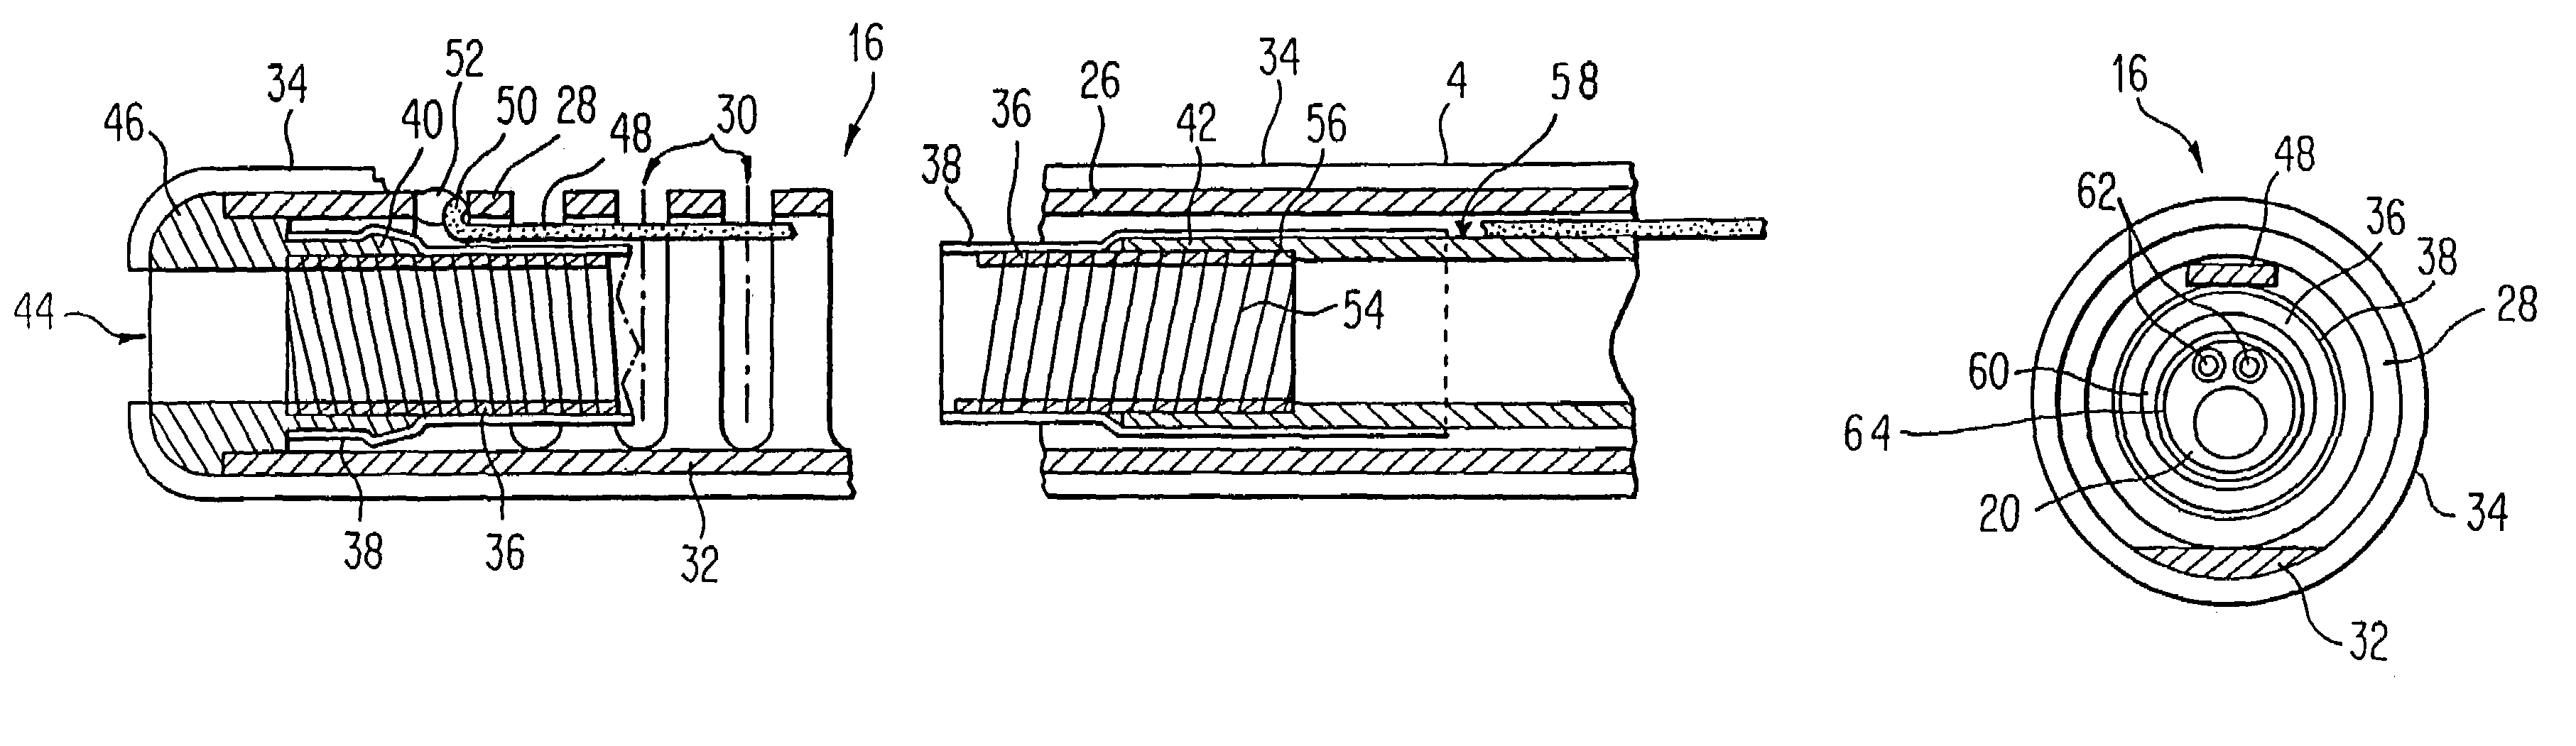 Treatment device with guidable needle